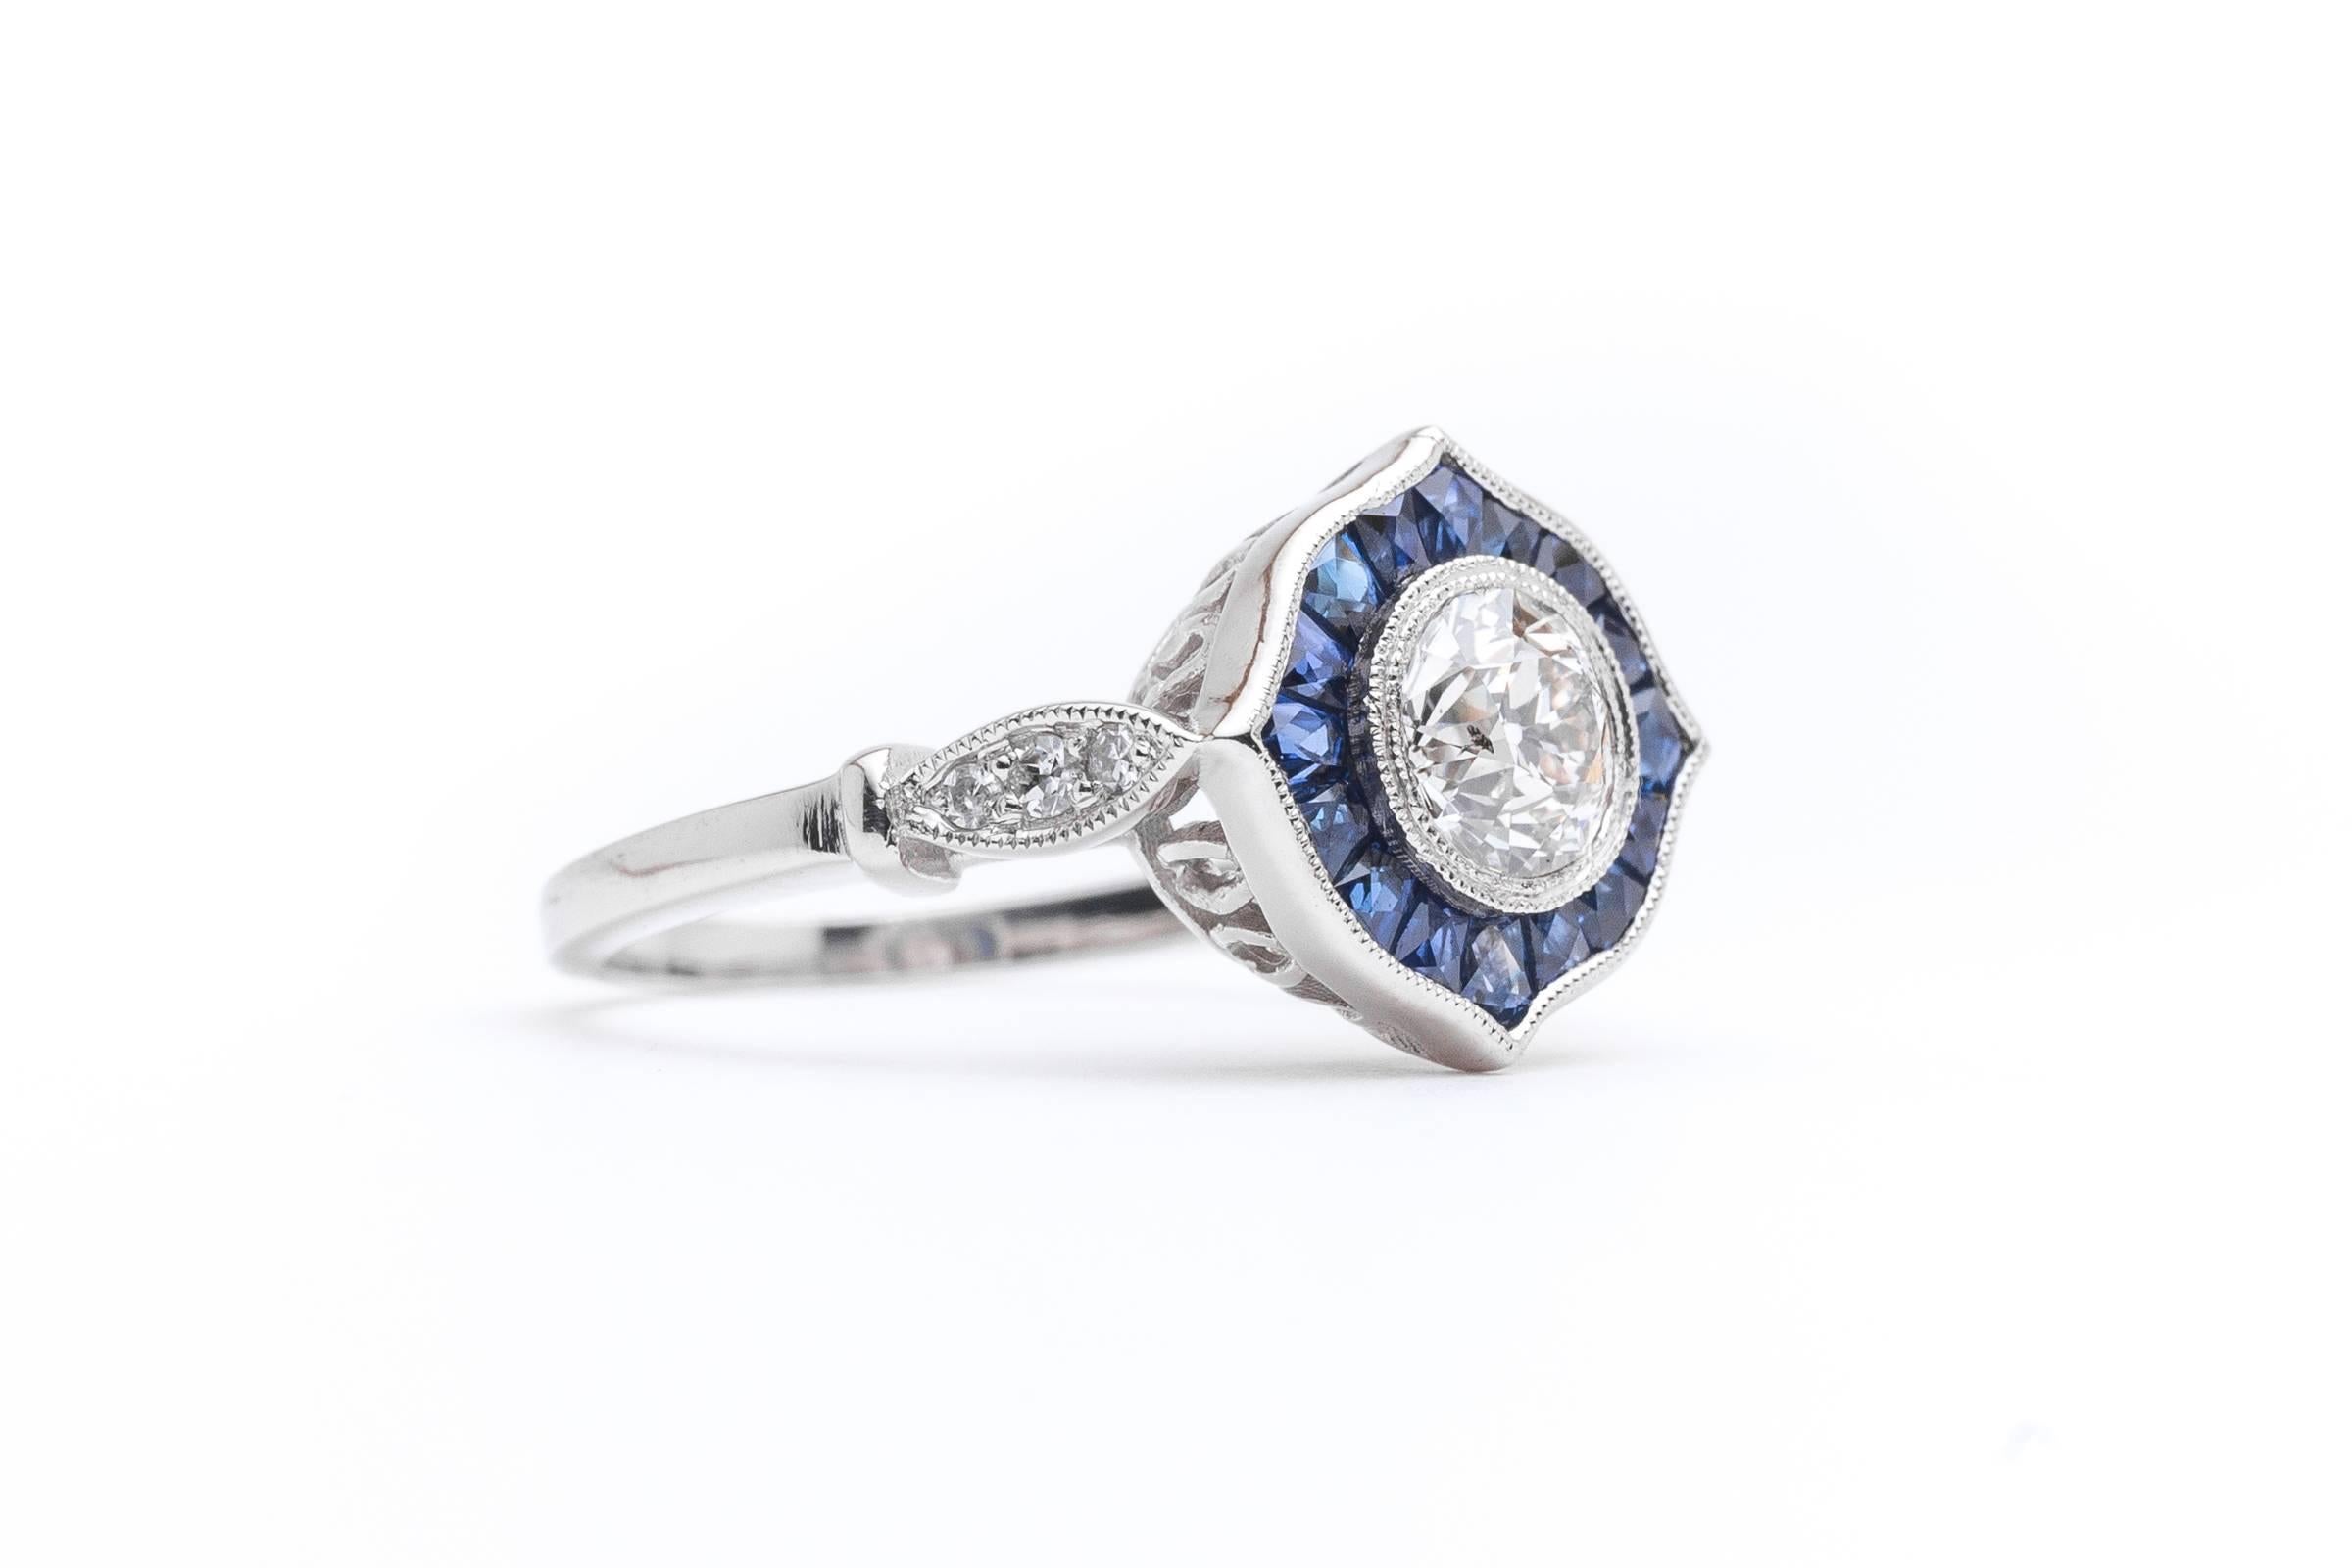 A truly incredible diamond and sapphire ring set in luxurious platinum. Centering this fantastic ring is a beautiful diamond of 0.86 carats surrounded by French cut sapphires.  

The center diamond is a beautiful VS clarity and F/G color antique